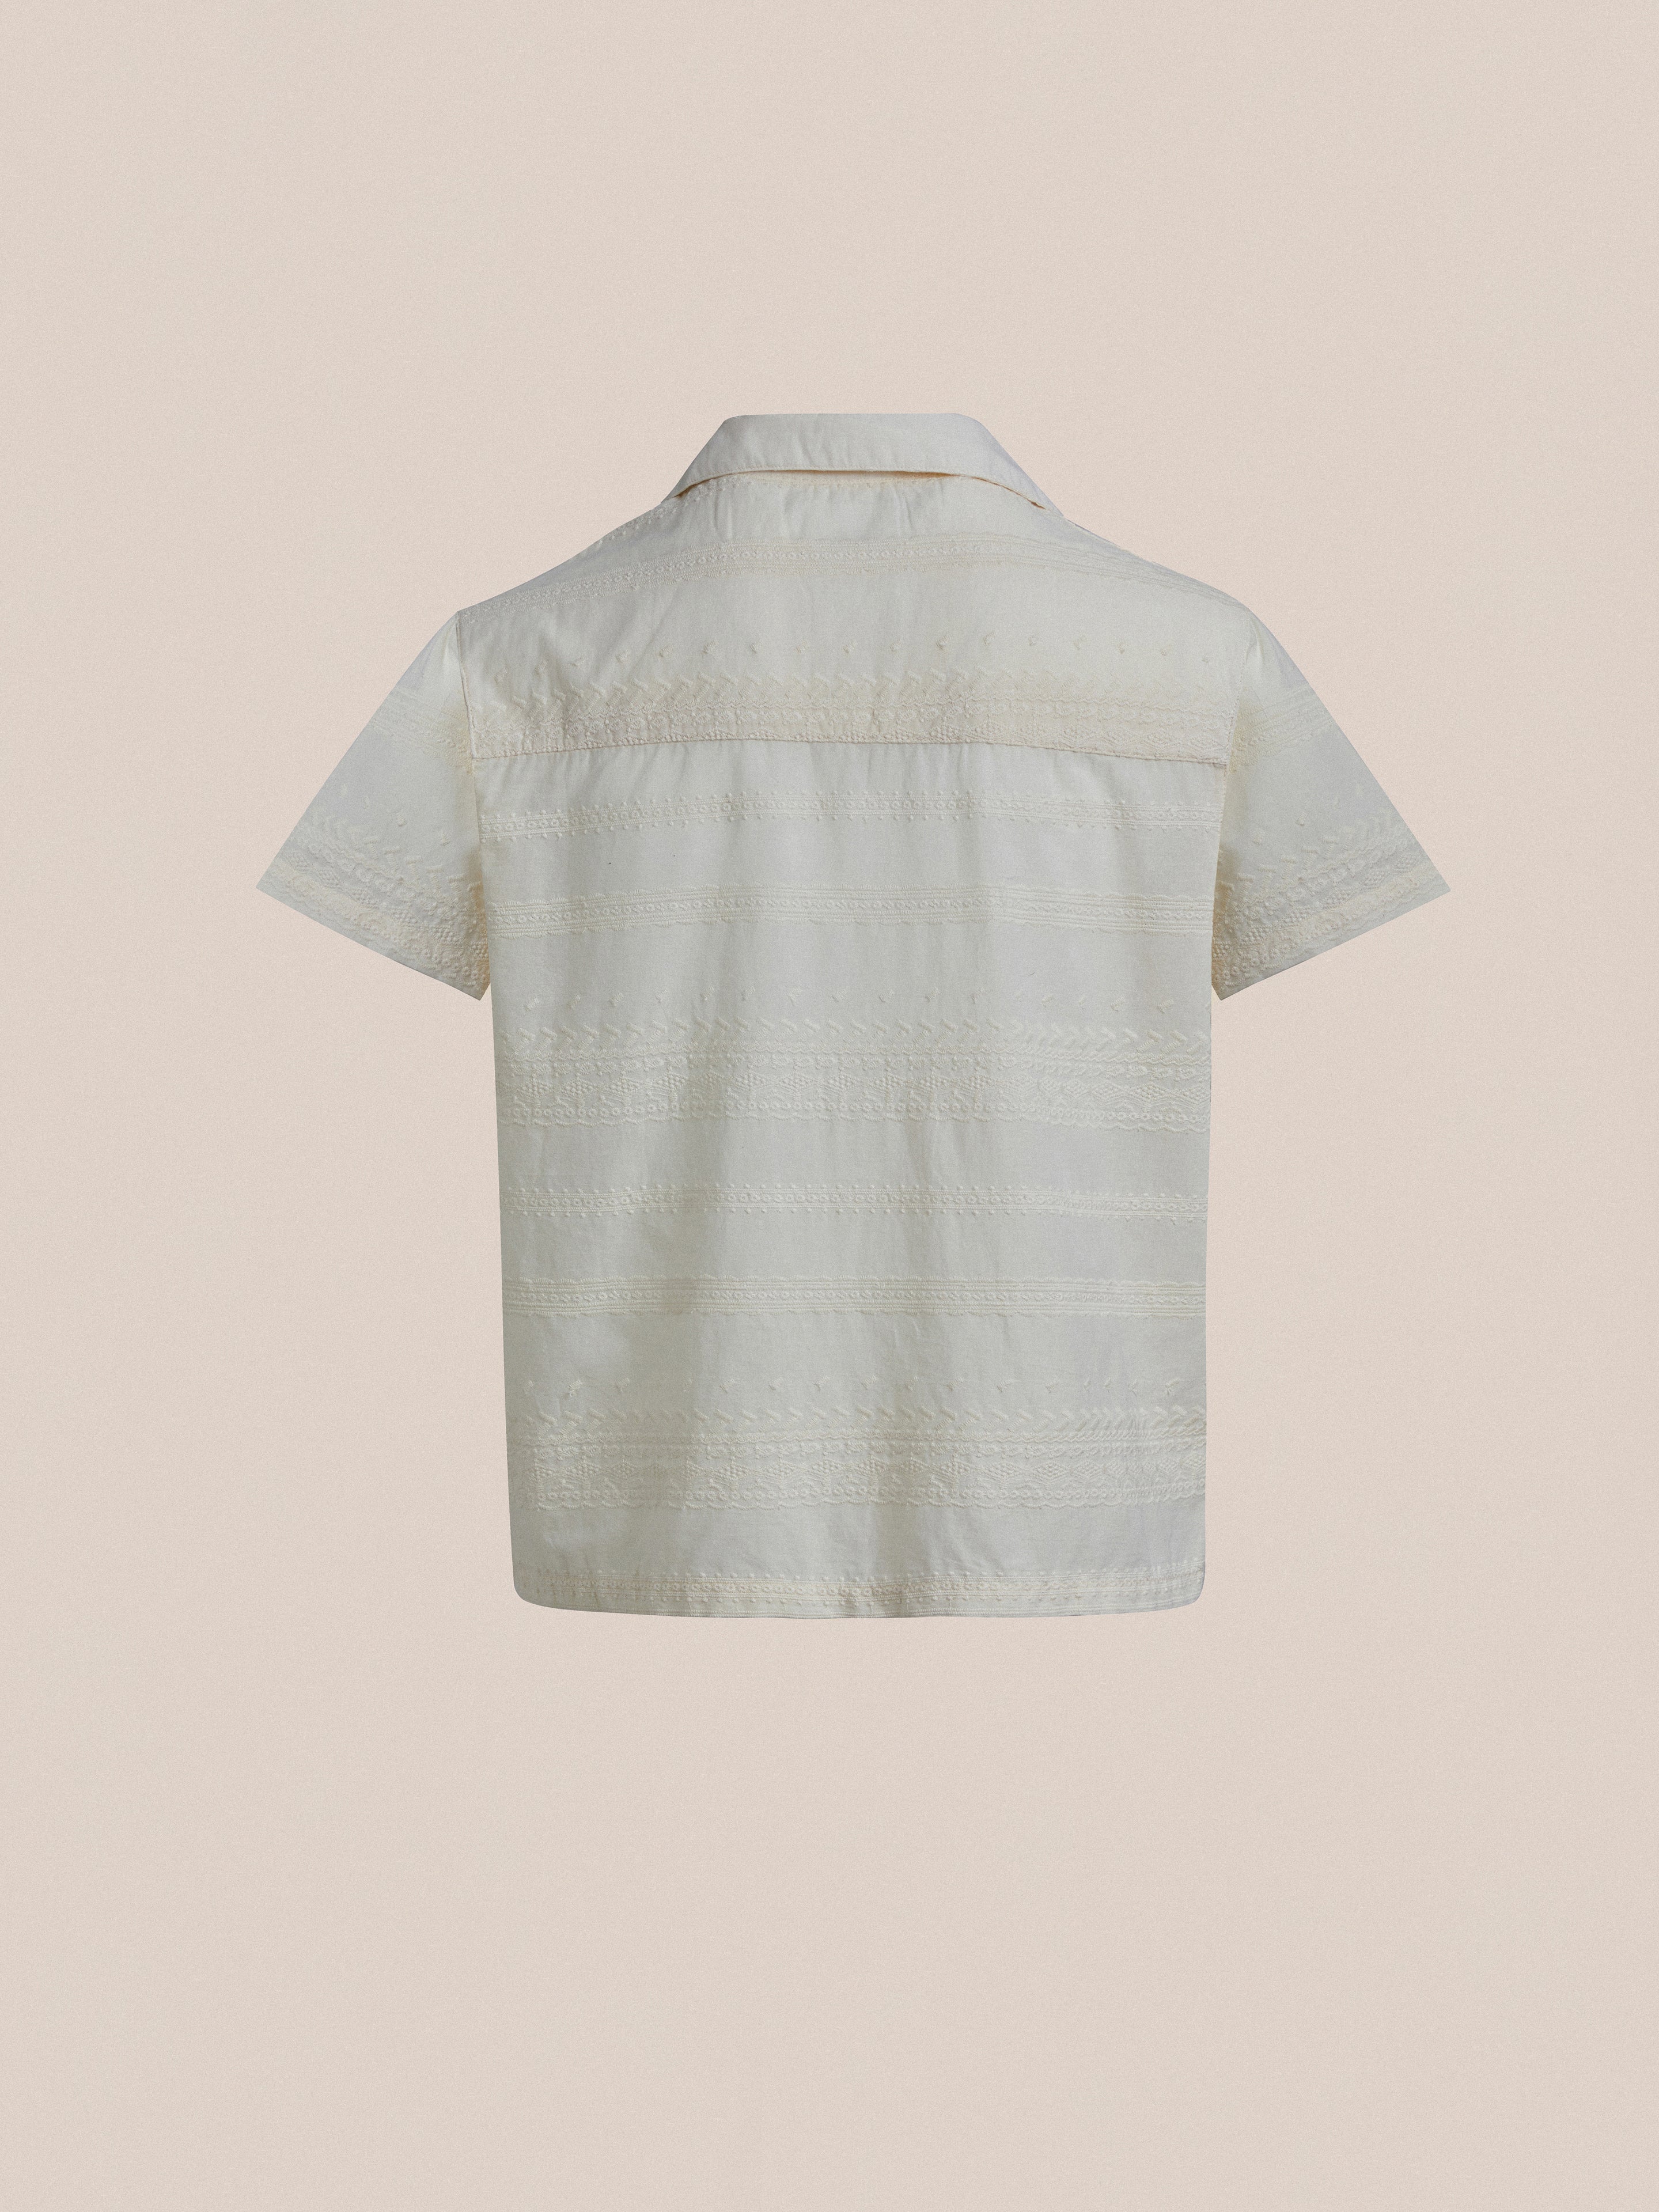 Found Lace Camp Shirt - Off White